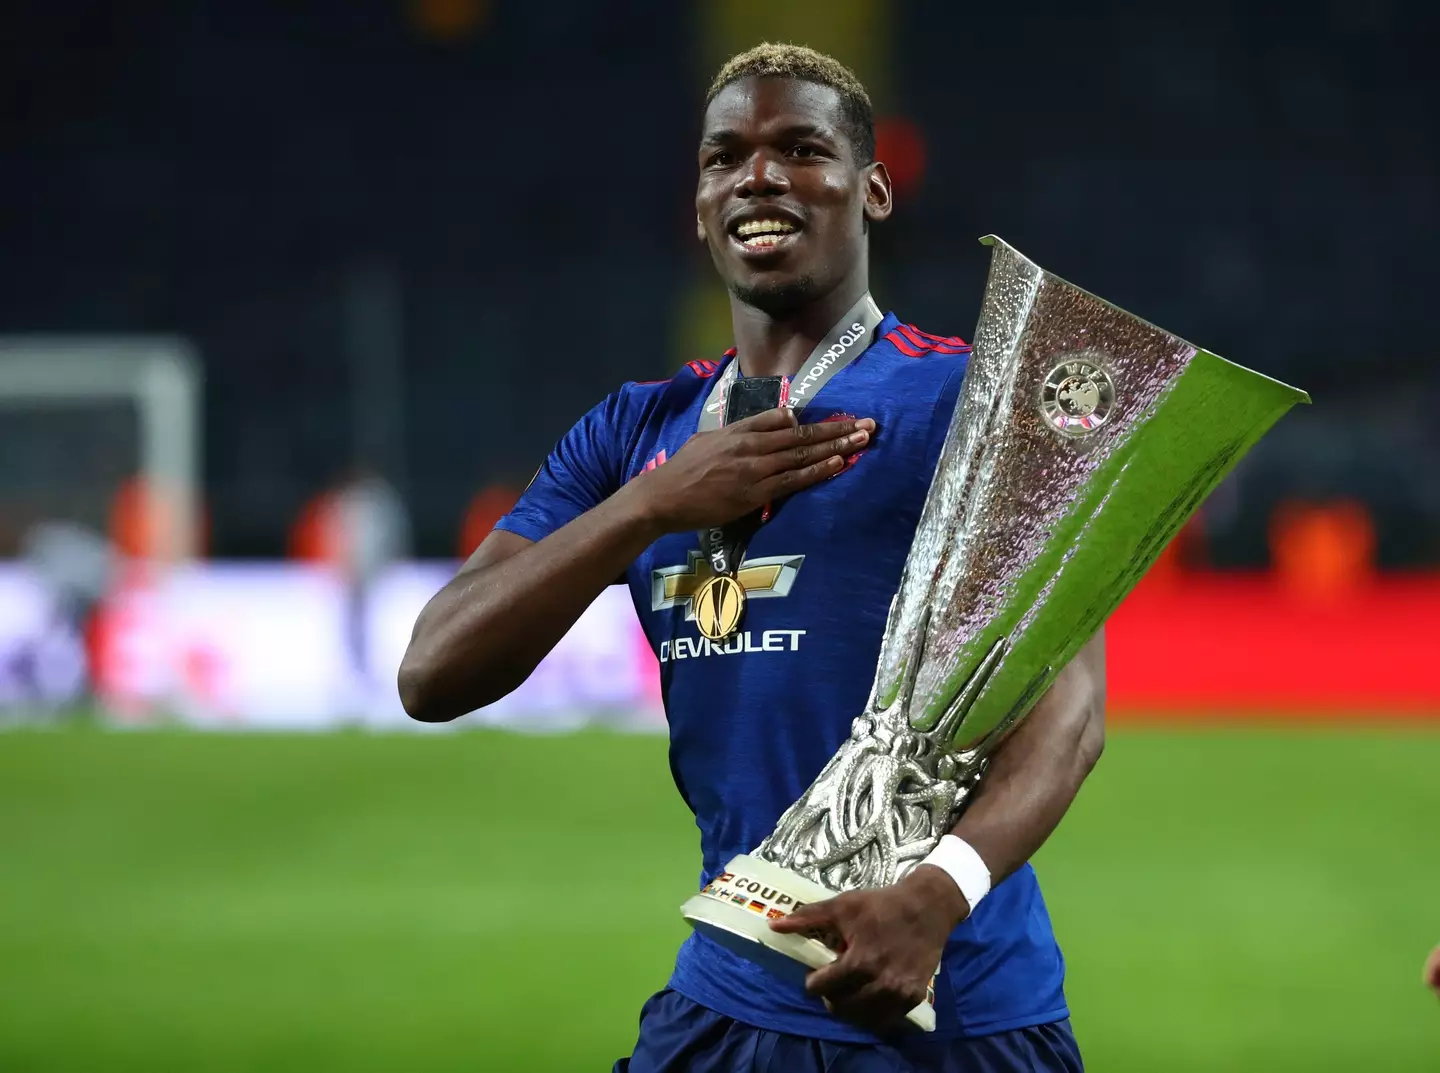 Paul Pogba tapping the Manchester United crest and holding the UEFA Europa League trophy after scoring in the 2017 final against AFC Ajax.